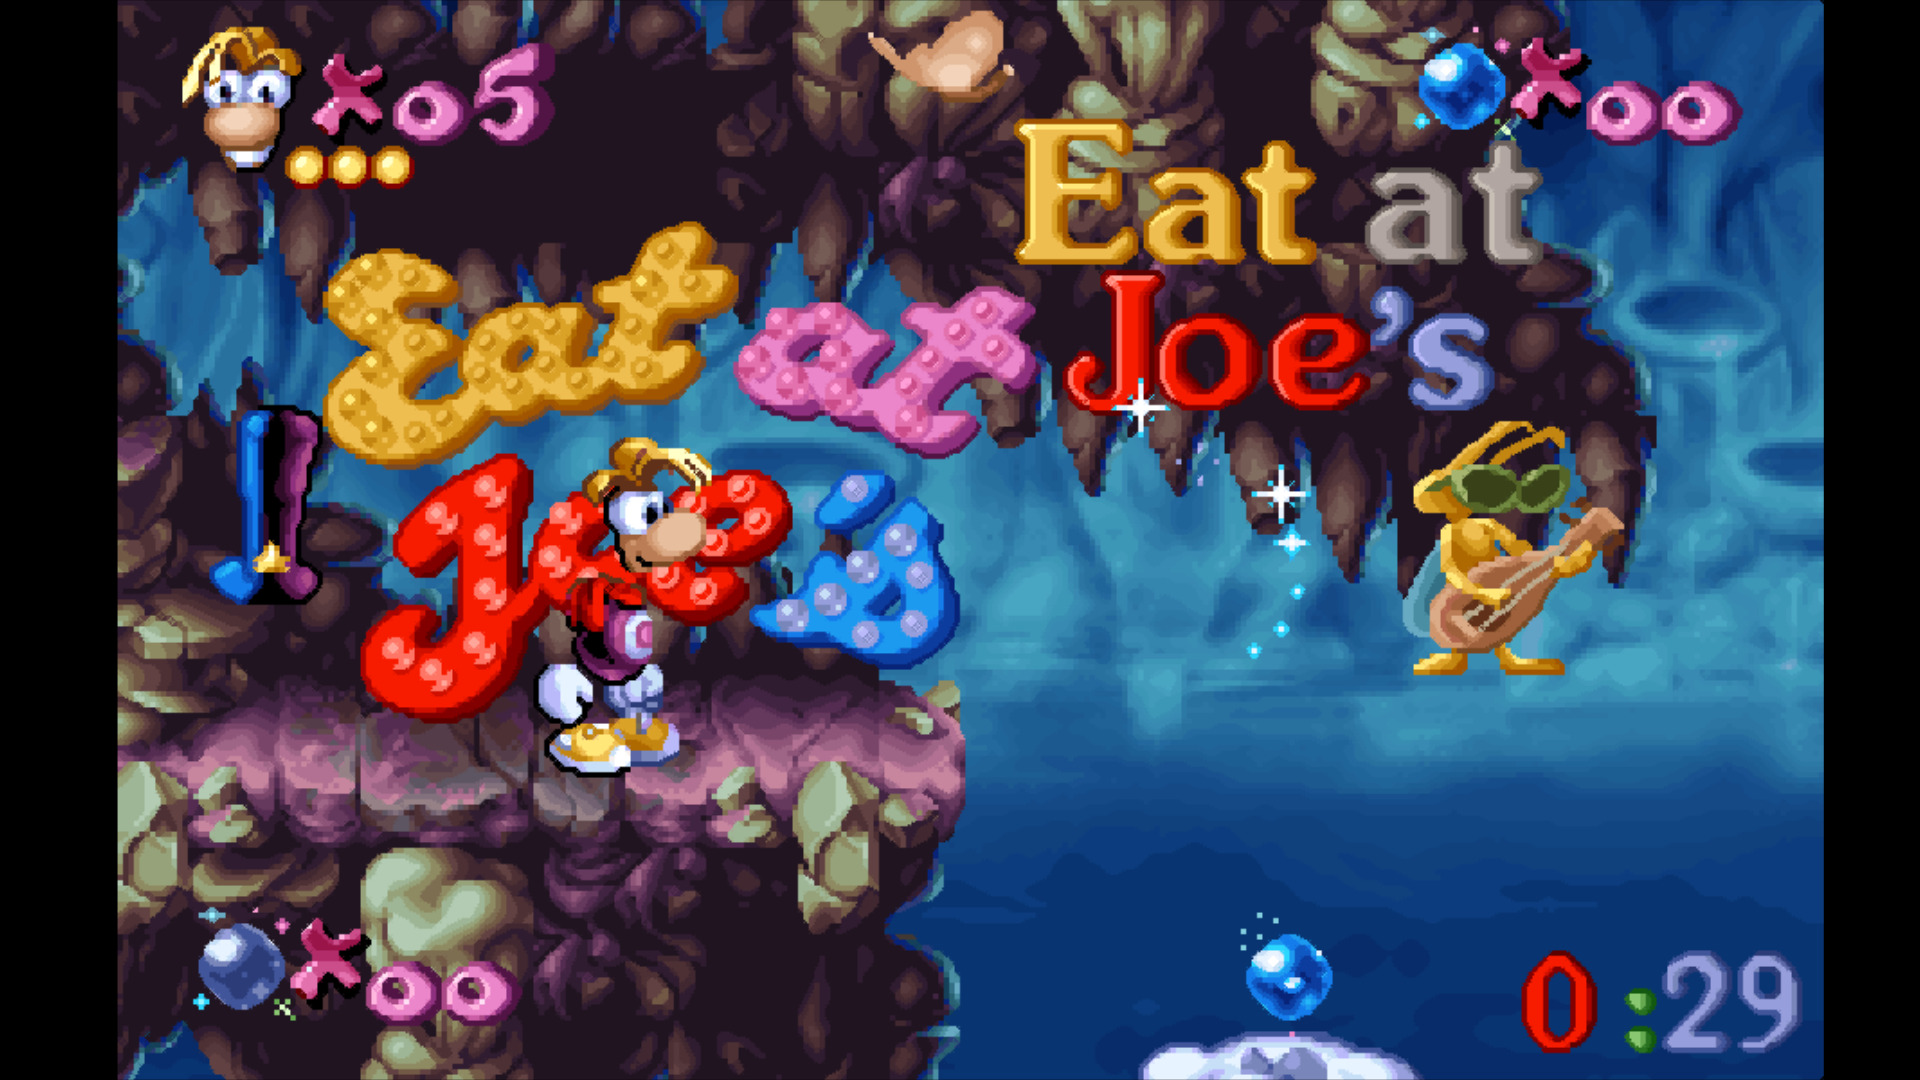 Rayman 1 and Edutainment objects inserted at the beginning of "Peaks and Rocks", as rendered in the game after the full patcher was run